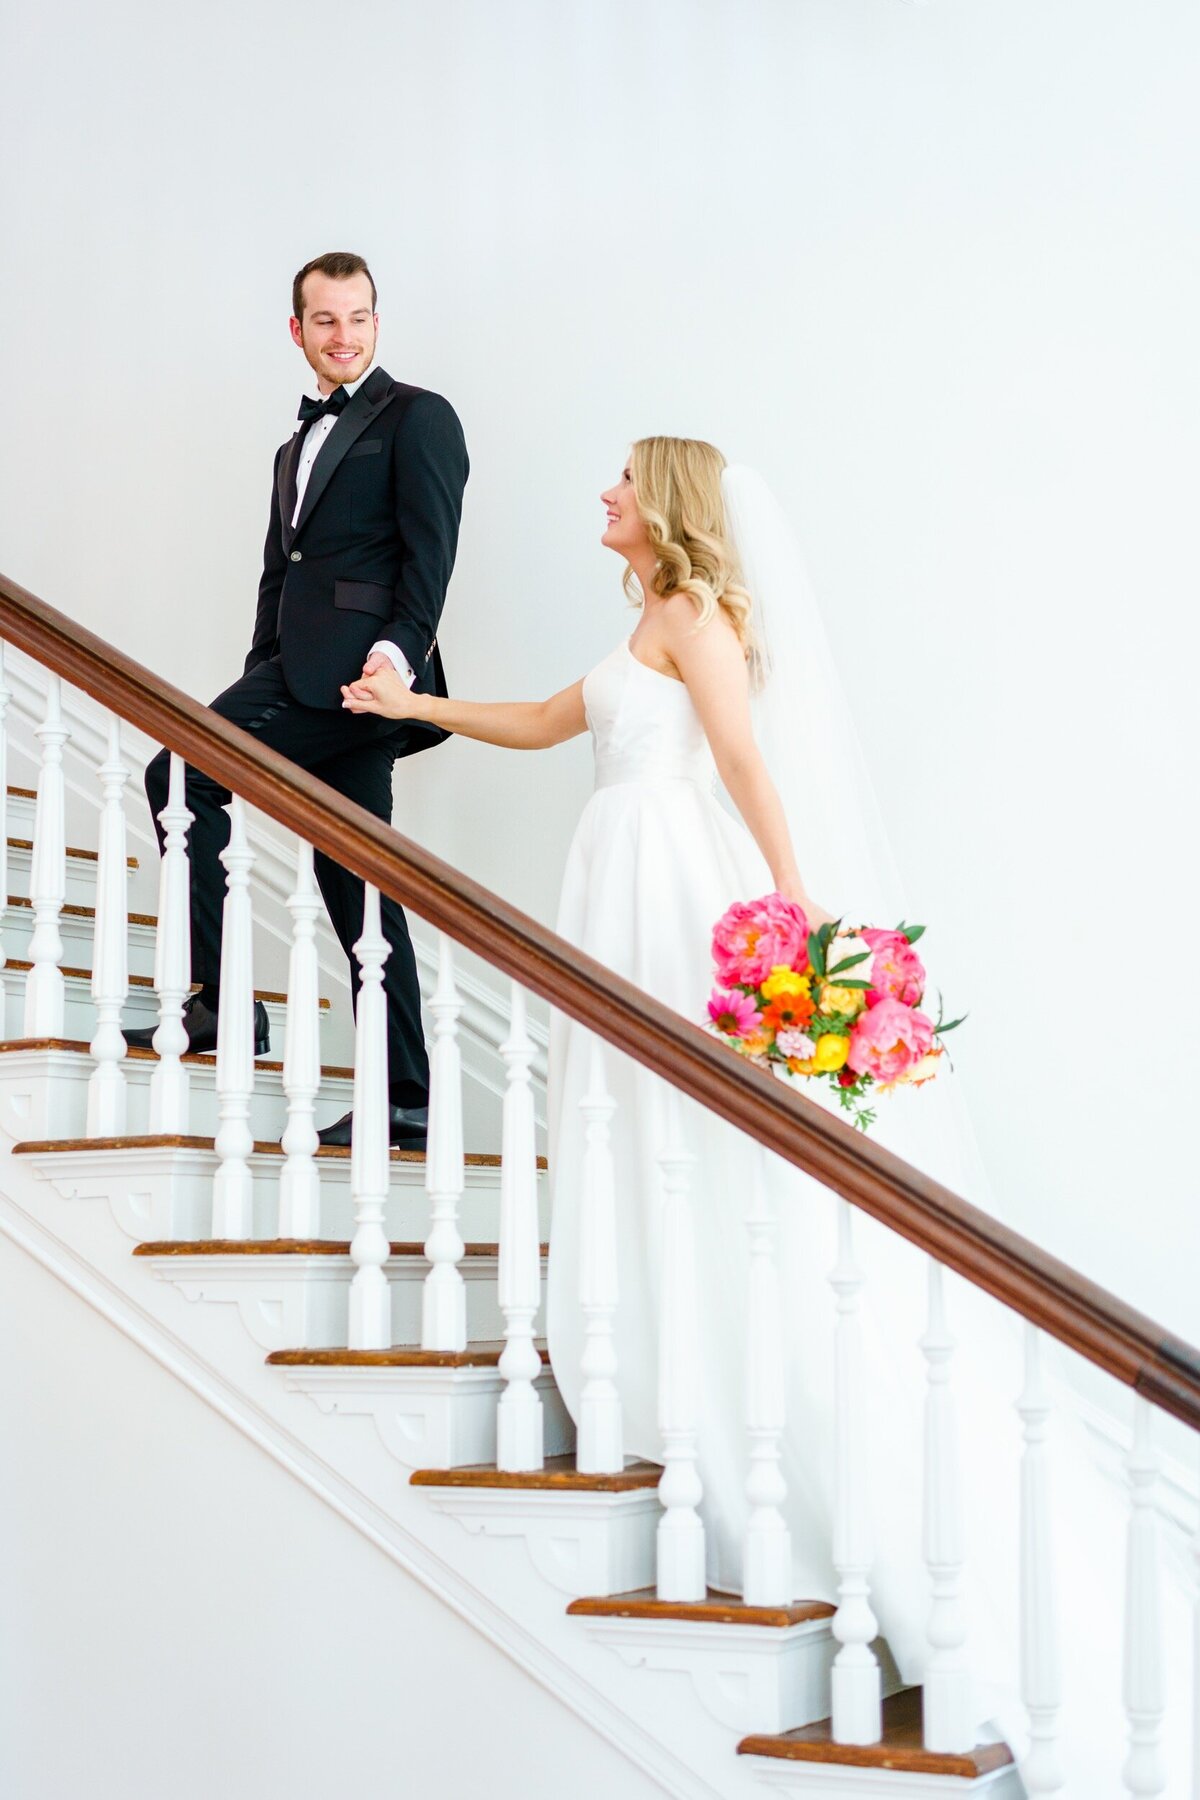 A groom leads his bride up a historic white staircase at their Raleigh wedding venue.